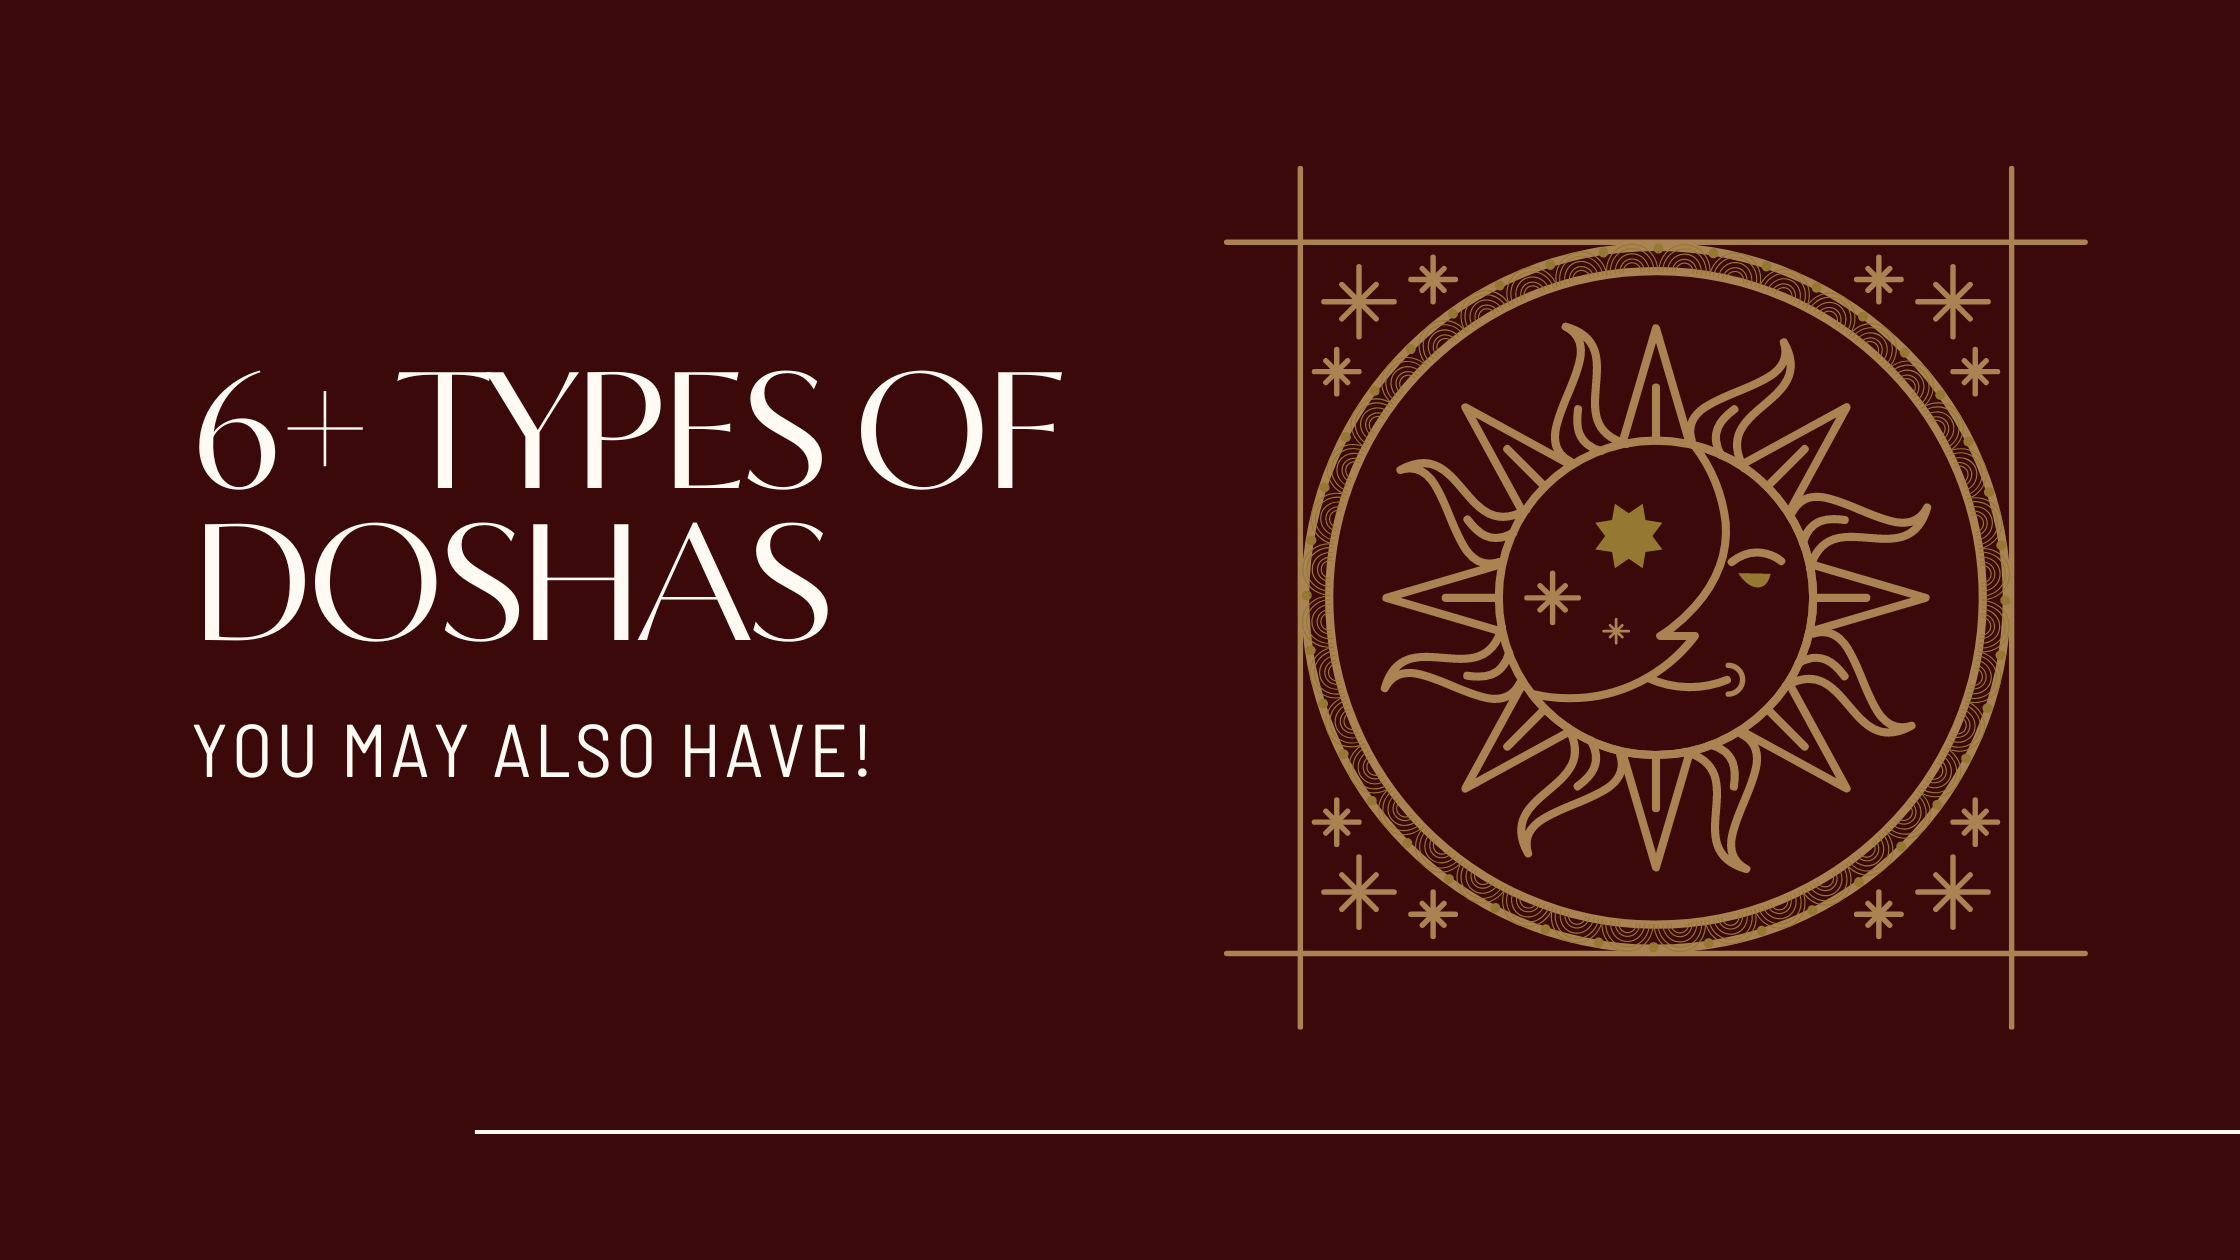 6+ Types of Doshas: You May Also Have!